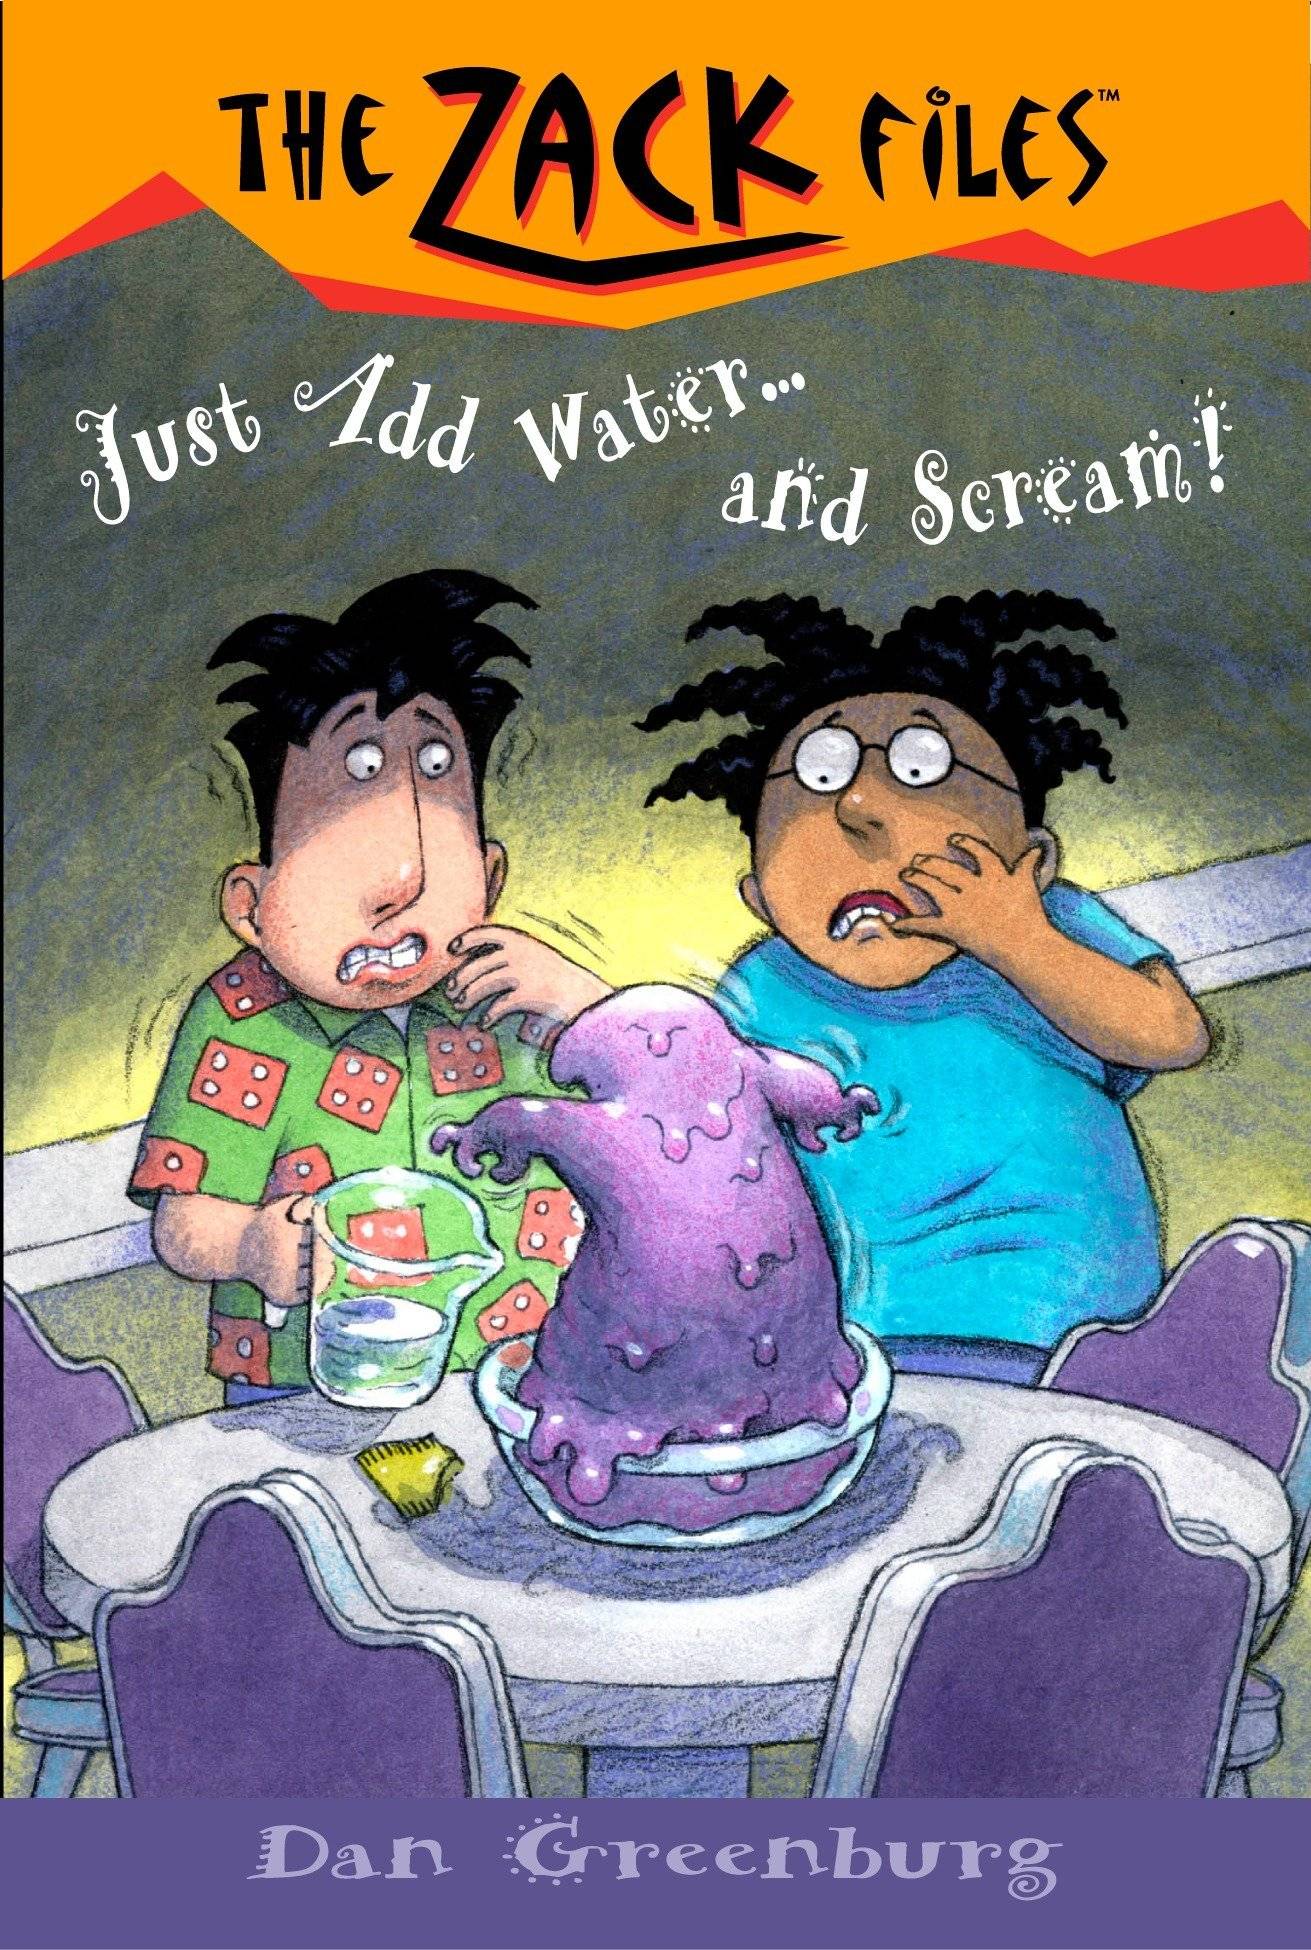 IMG : The Zack files-Just add water and scream!#29